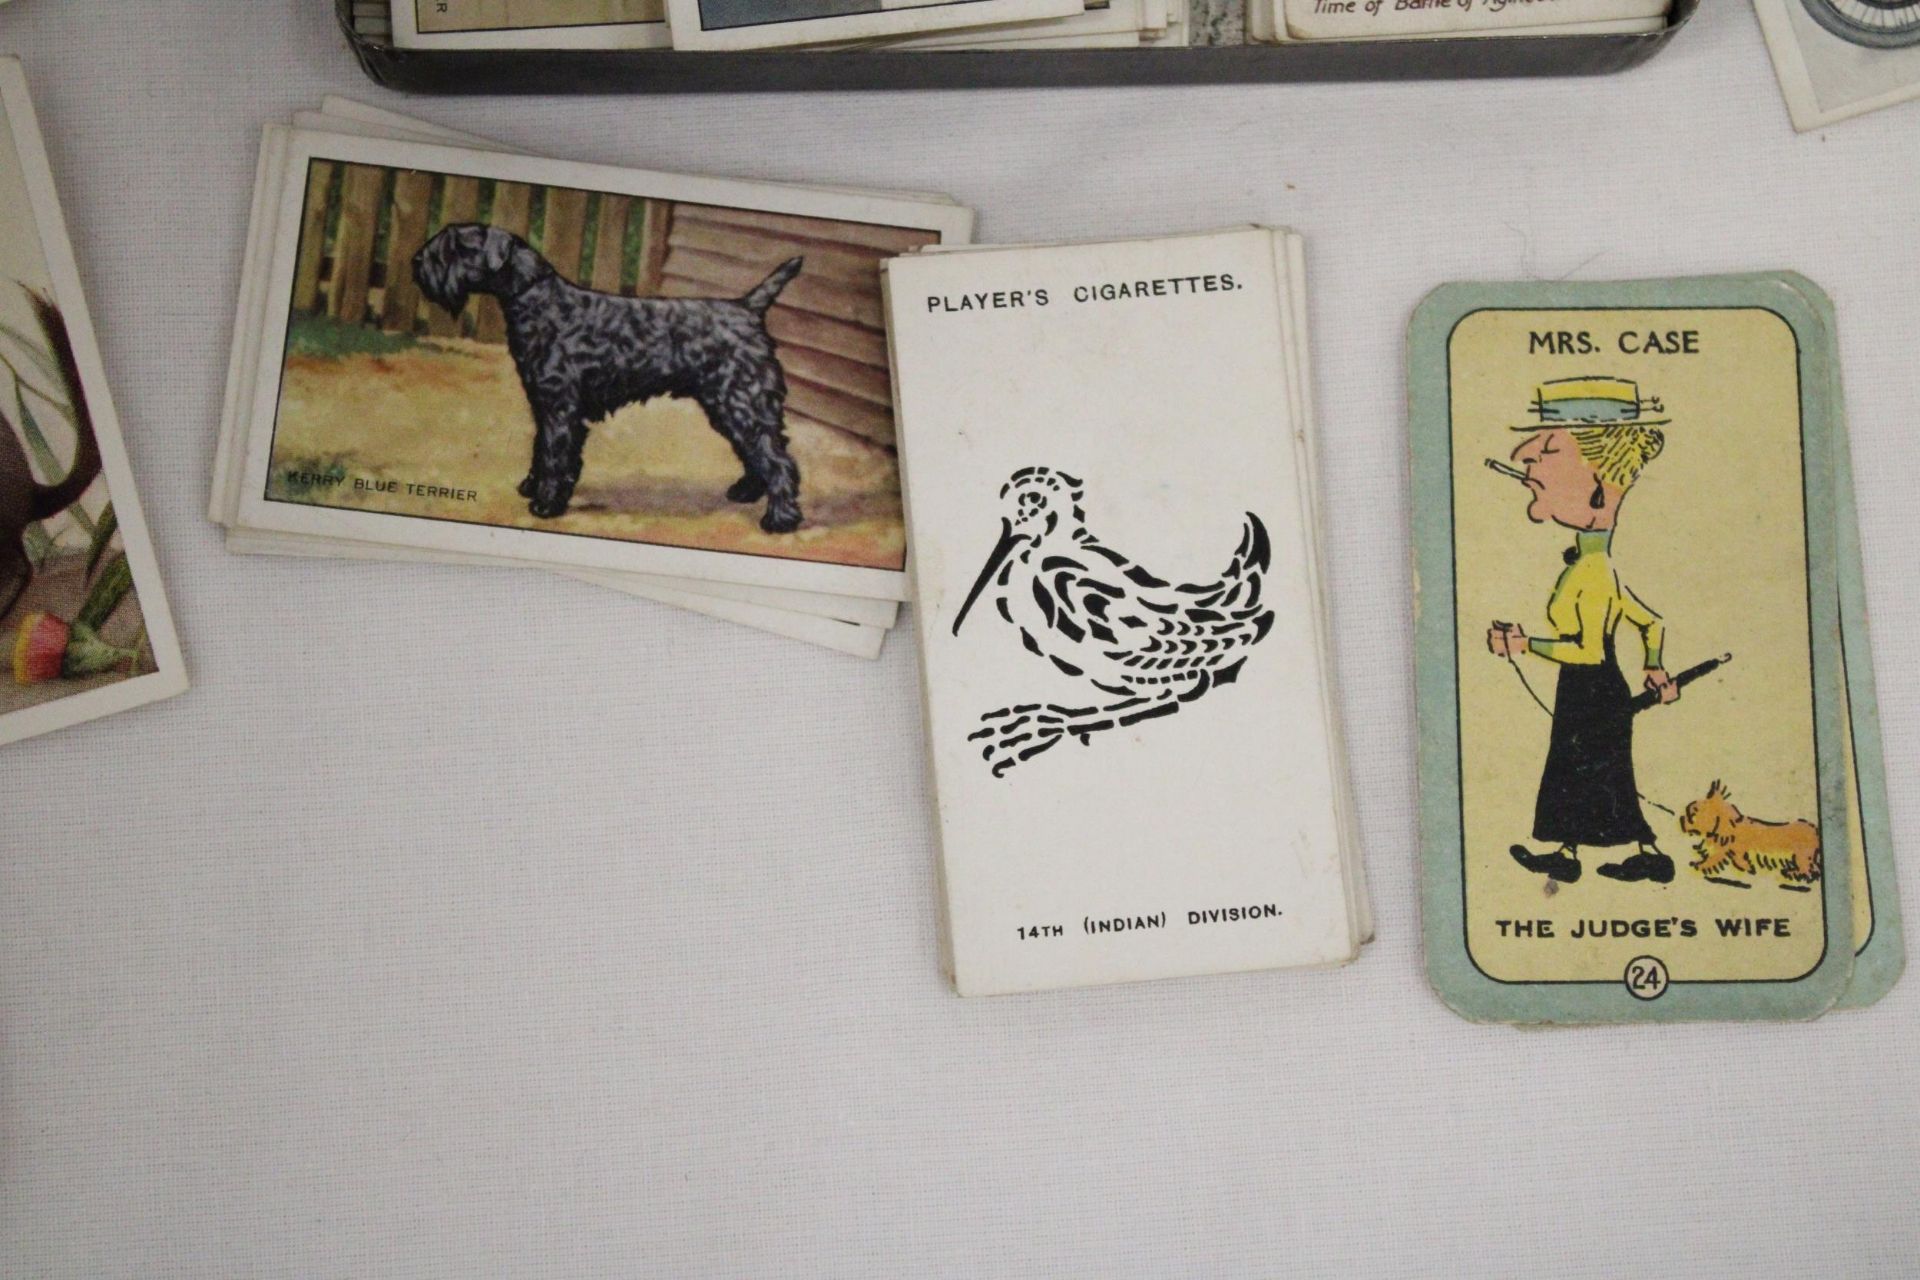 A VINTAGE CIGARETTE TIN CONTAINING CIGARETTE CARDS - Image 5 of 5